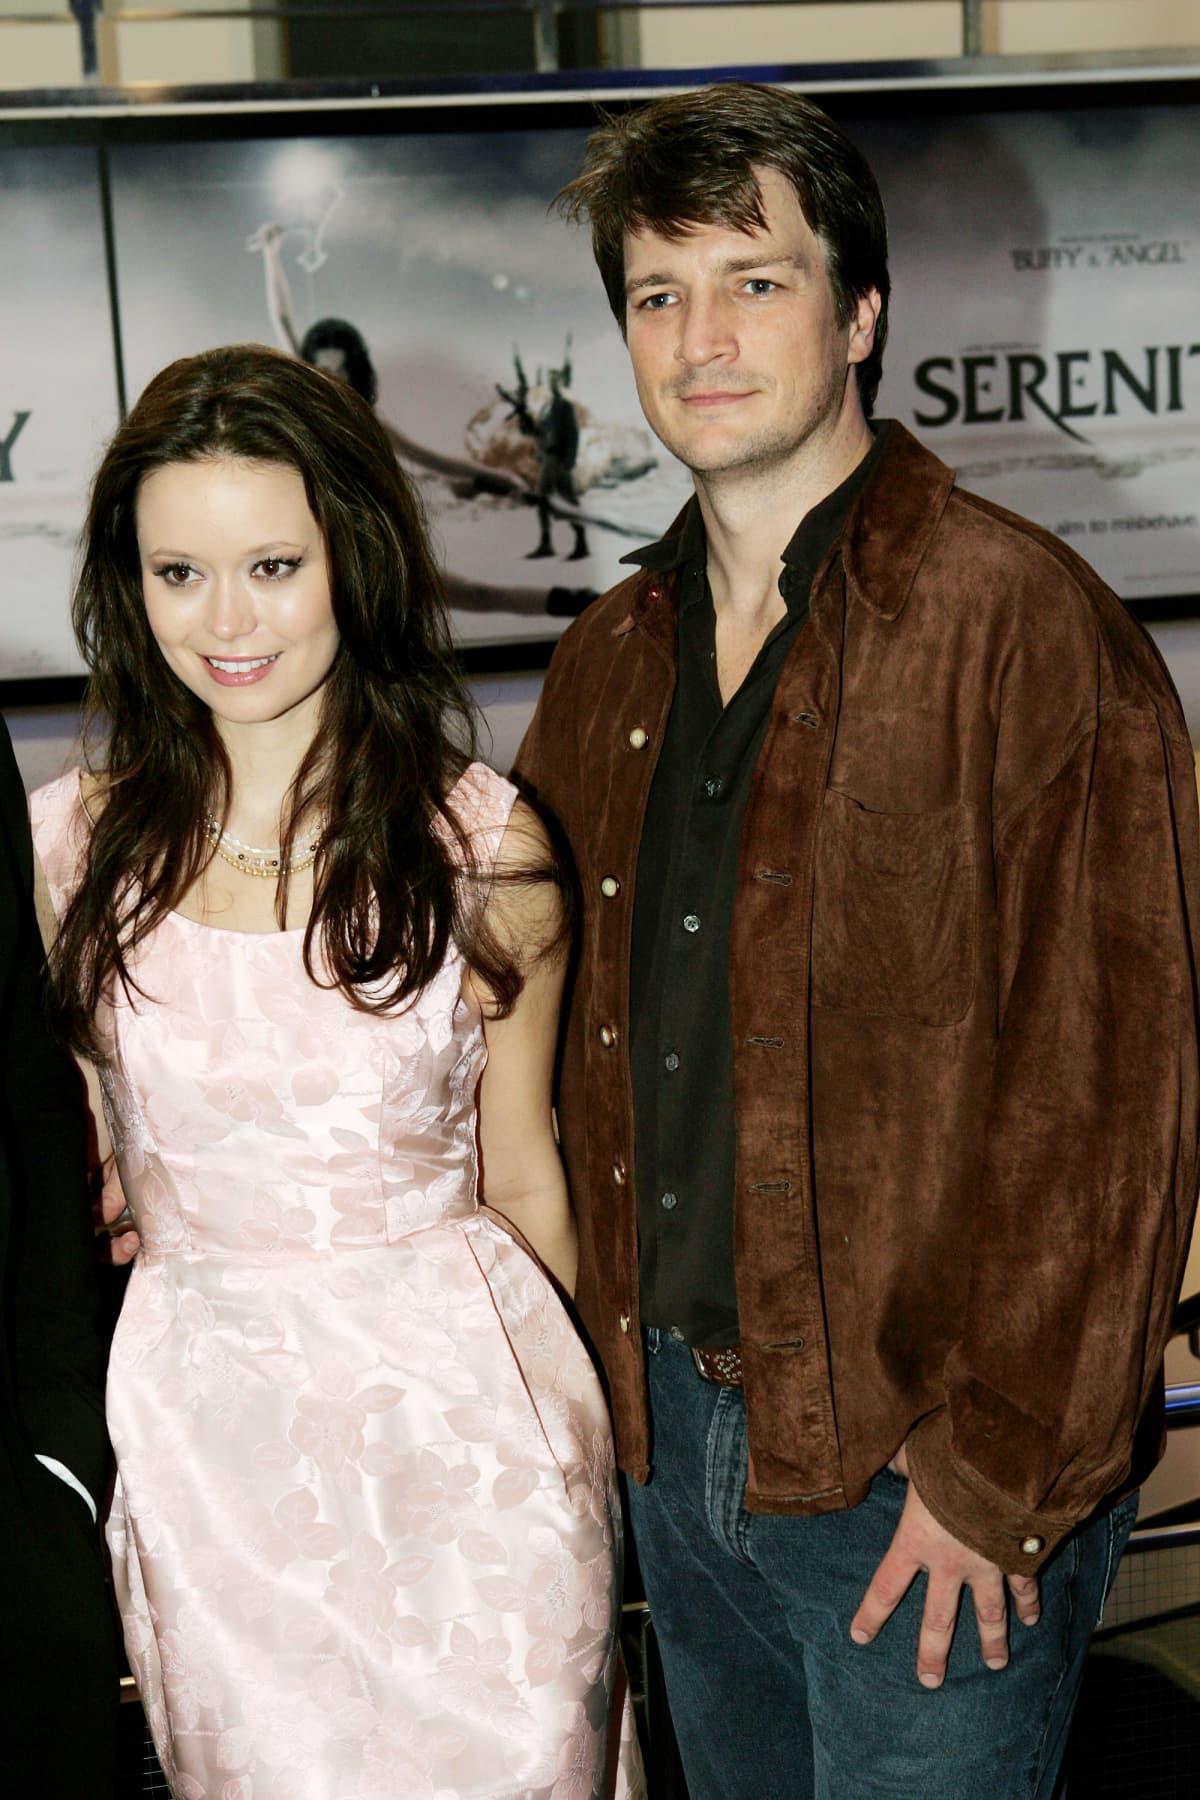 Summer Glau and Nathan Fillion attend the premiere of "Serenity" at Odeon West End, Leicester Square. (Photo by rune hellestad/Corbis via Getty Images)